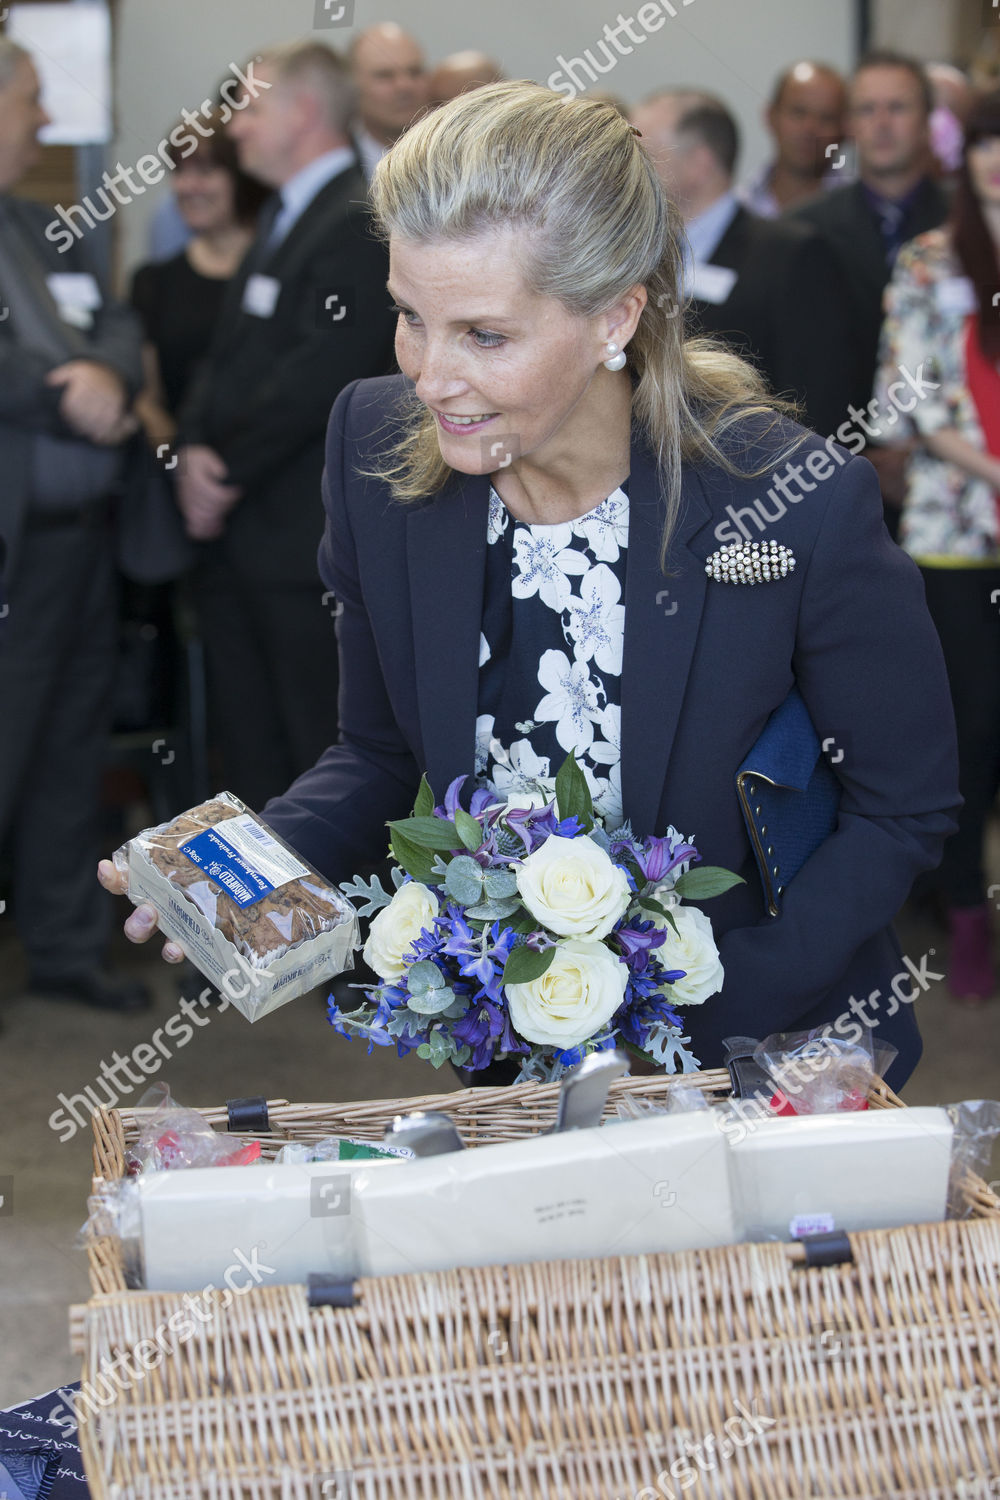 sophie-countess-of-wessex-visits-the-marshfield-bakery-limited-tolldown-dyrham-wiltshire-britain-shutterstock-editorial-5064843ae.jpg